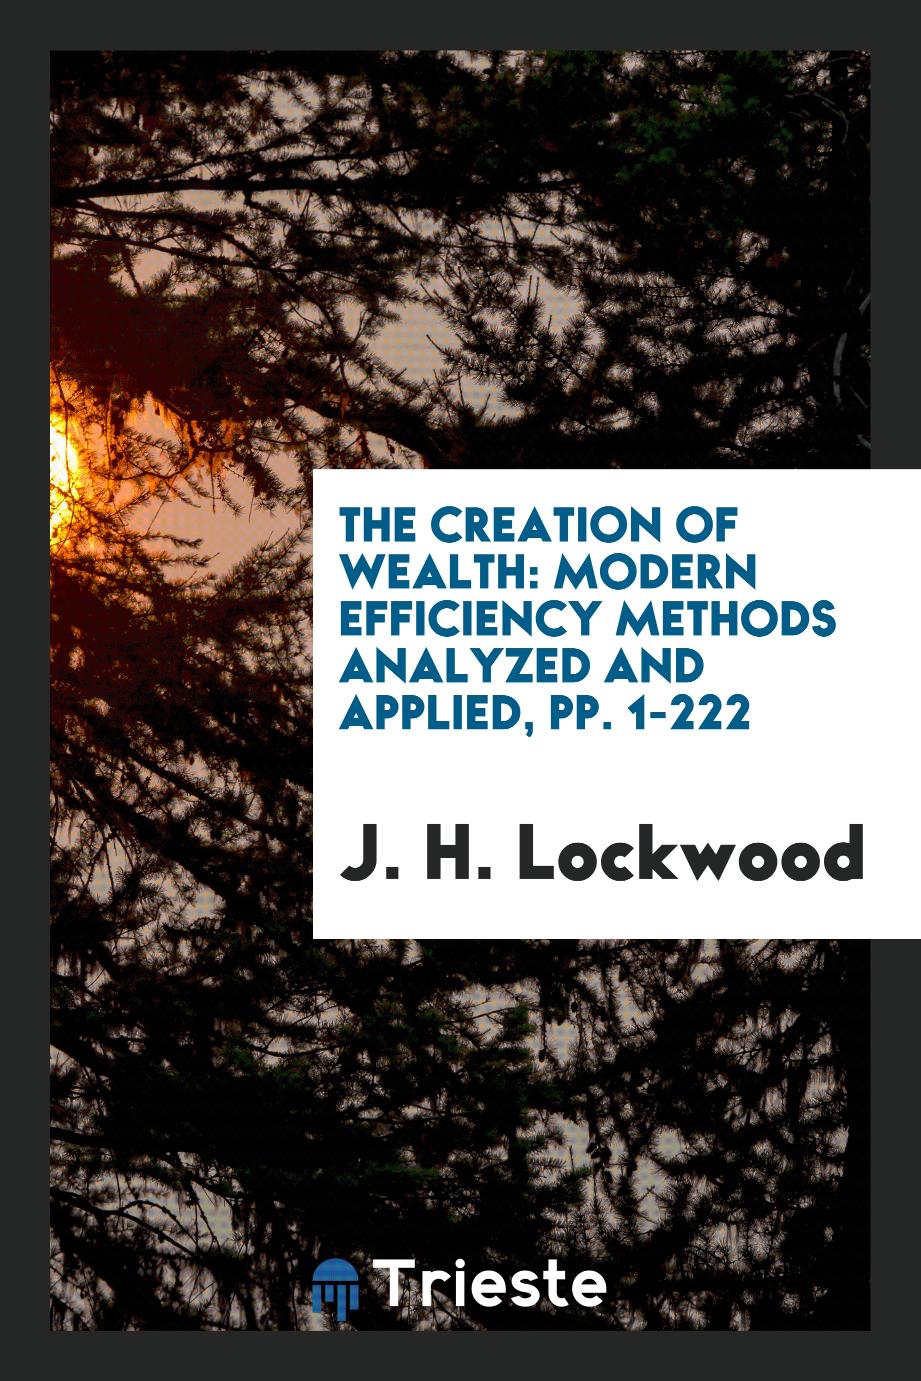 The Creation of Wealth: Modern Efficiency Methods Analyzed and Applied, pp. 1-222